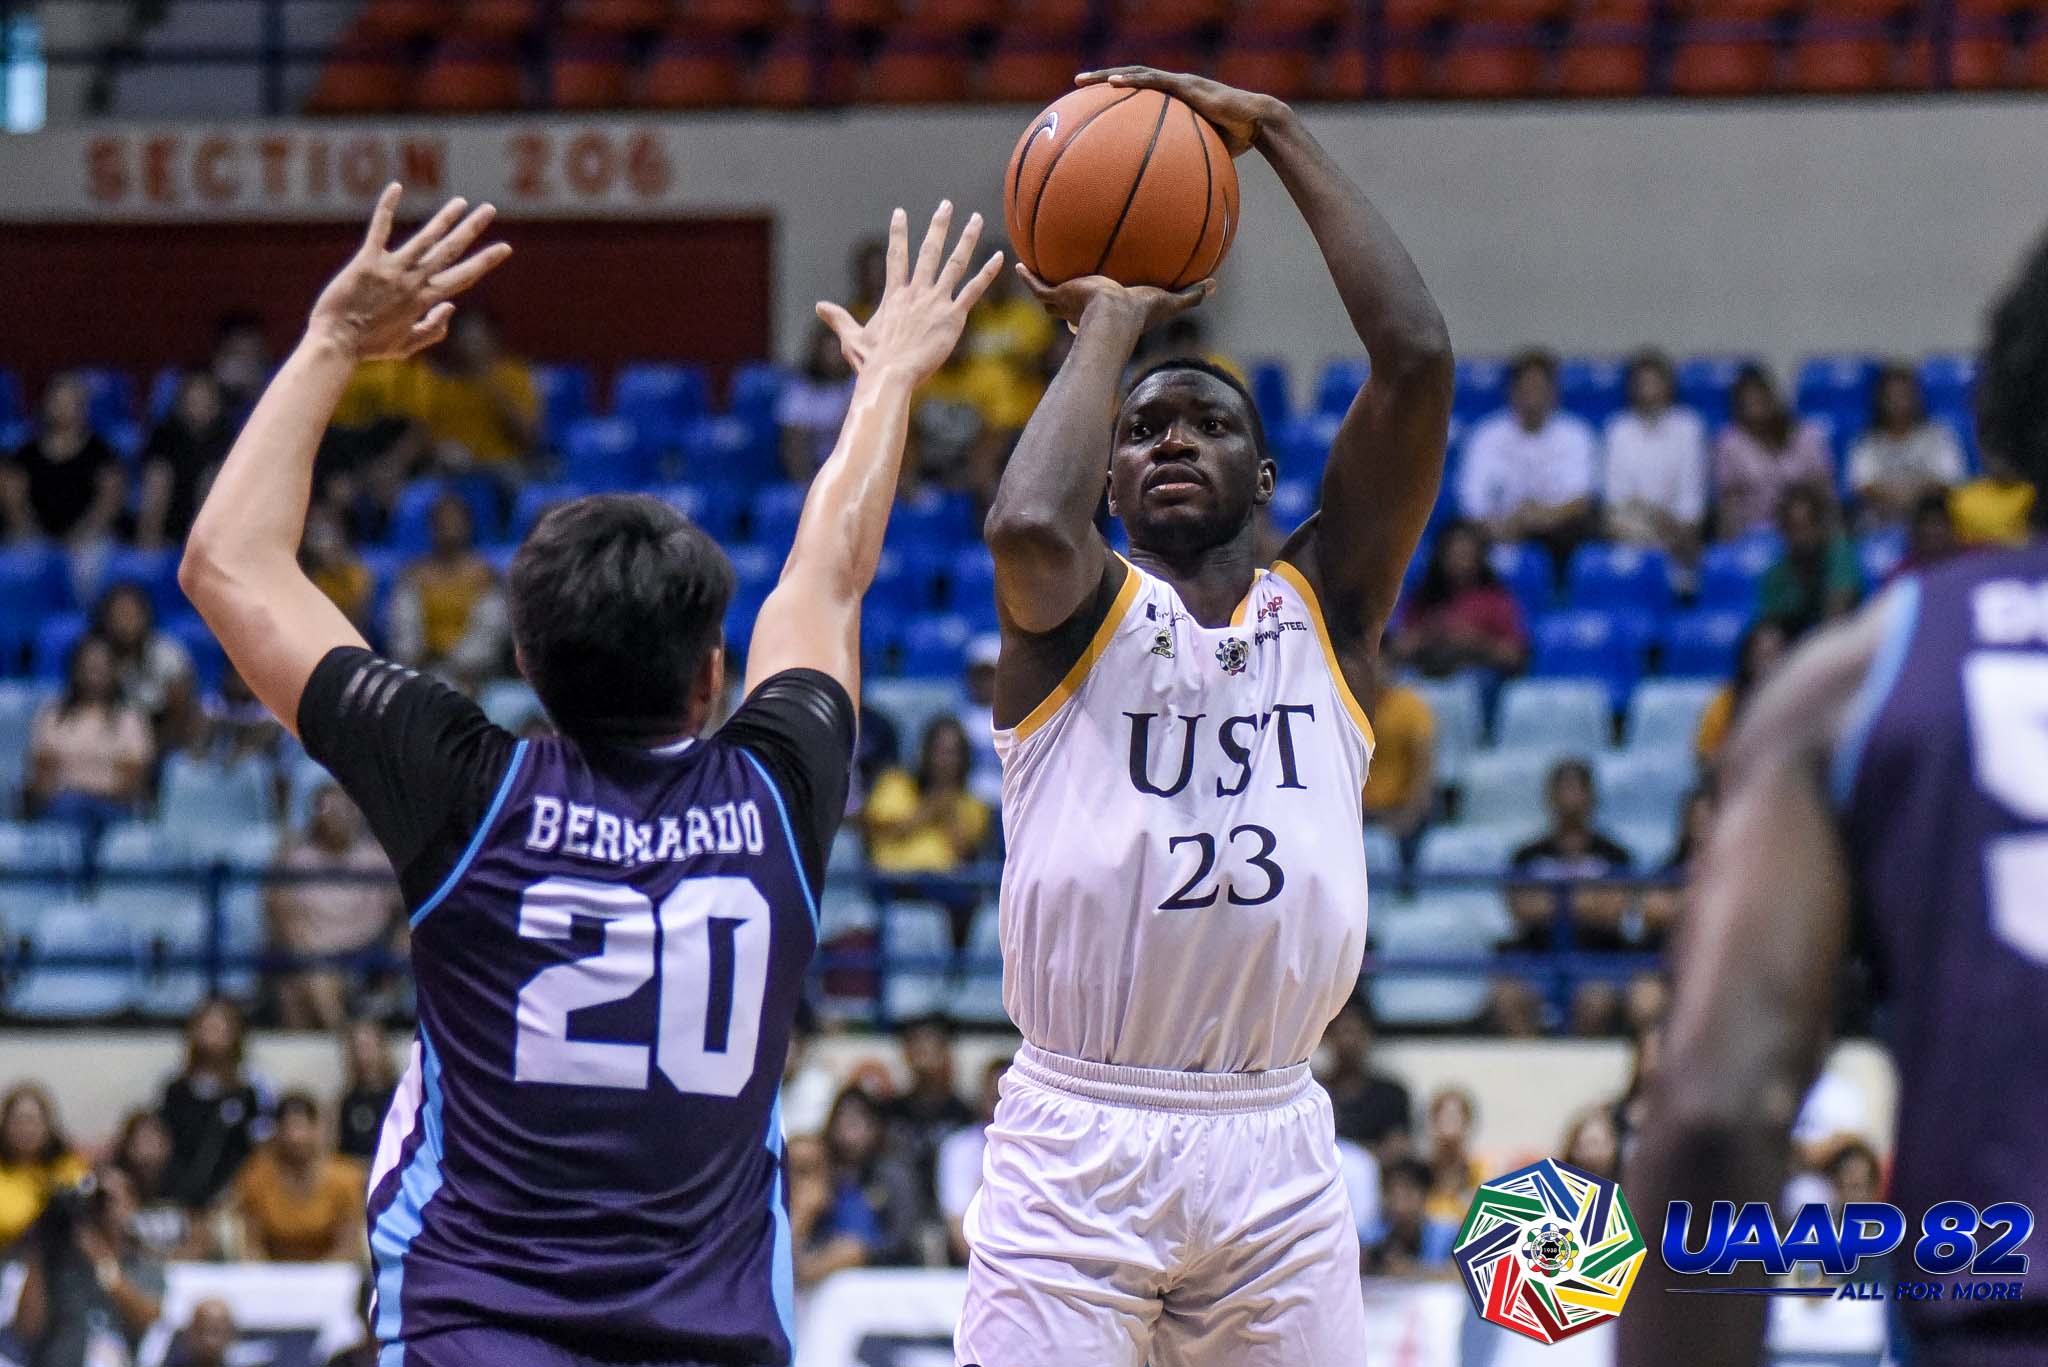 UST survives late Adamson rally, clinches playoff berth